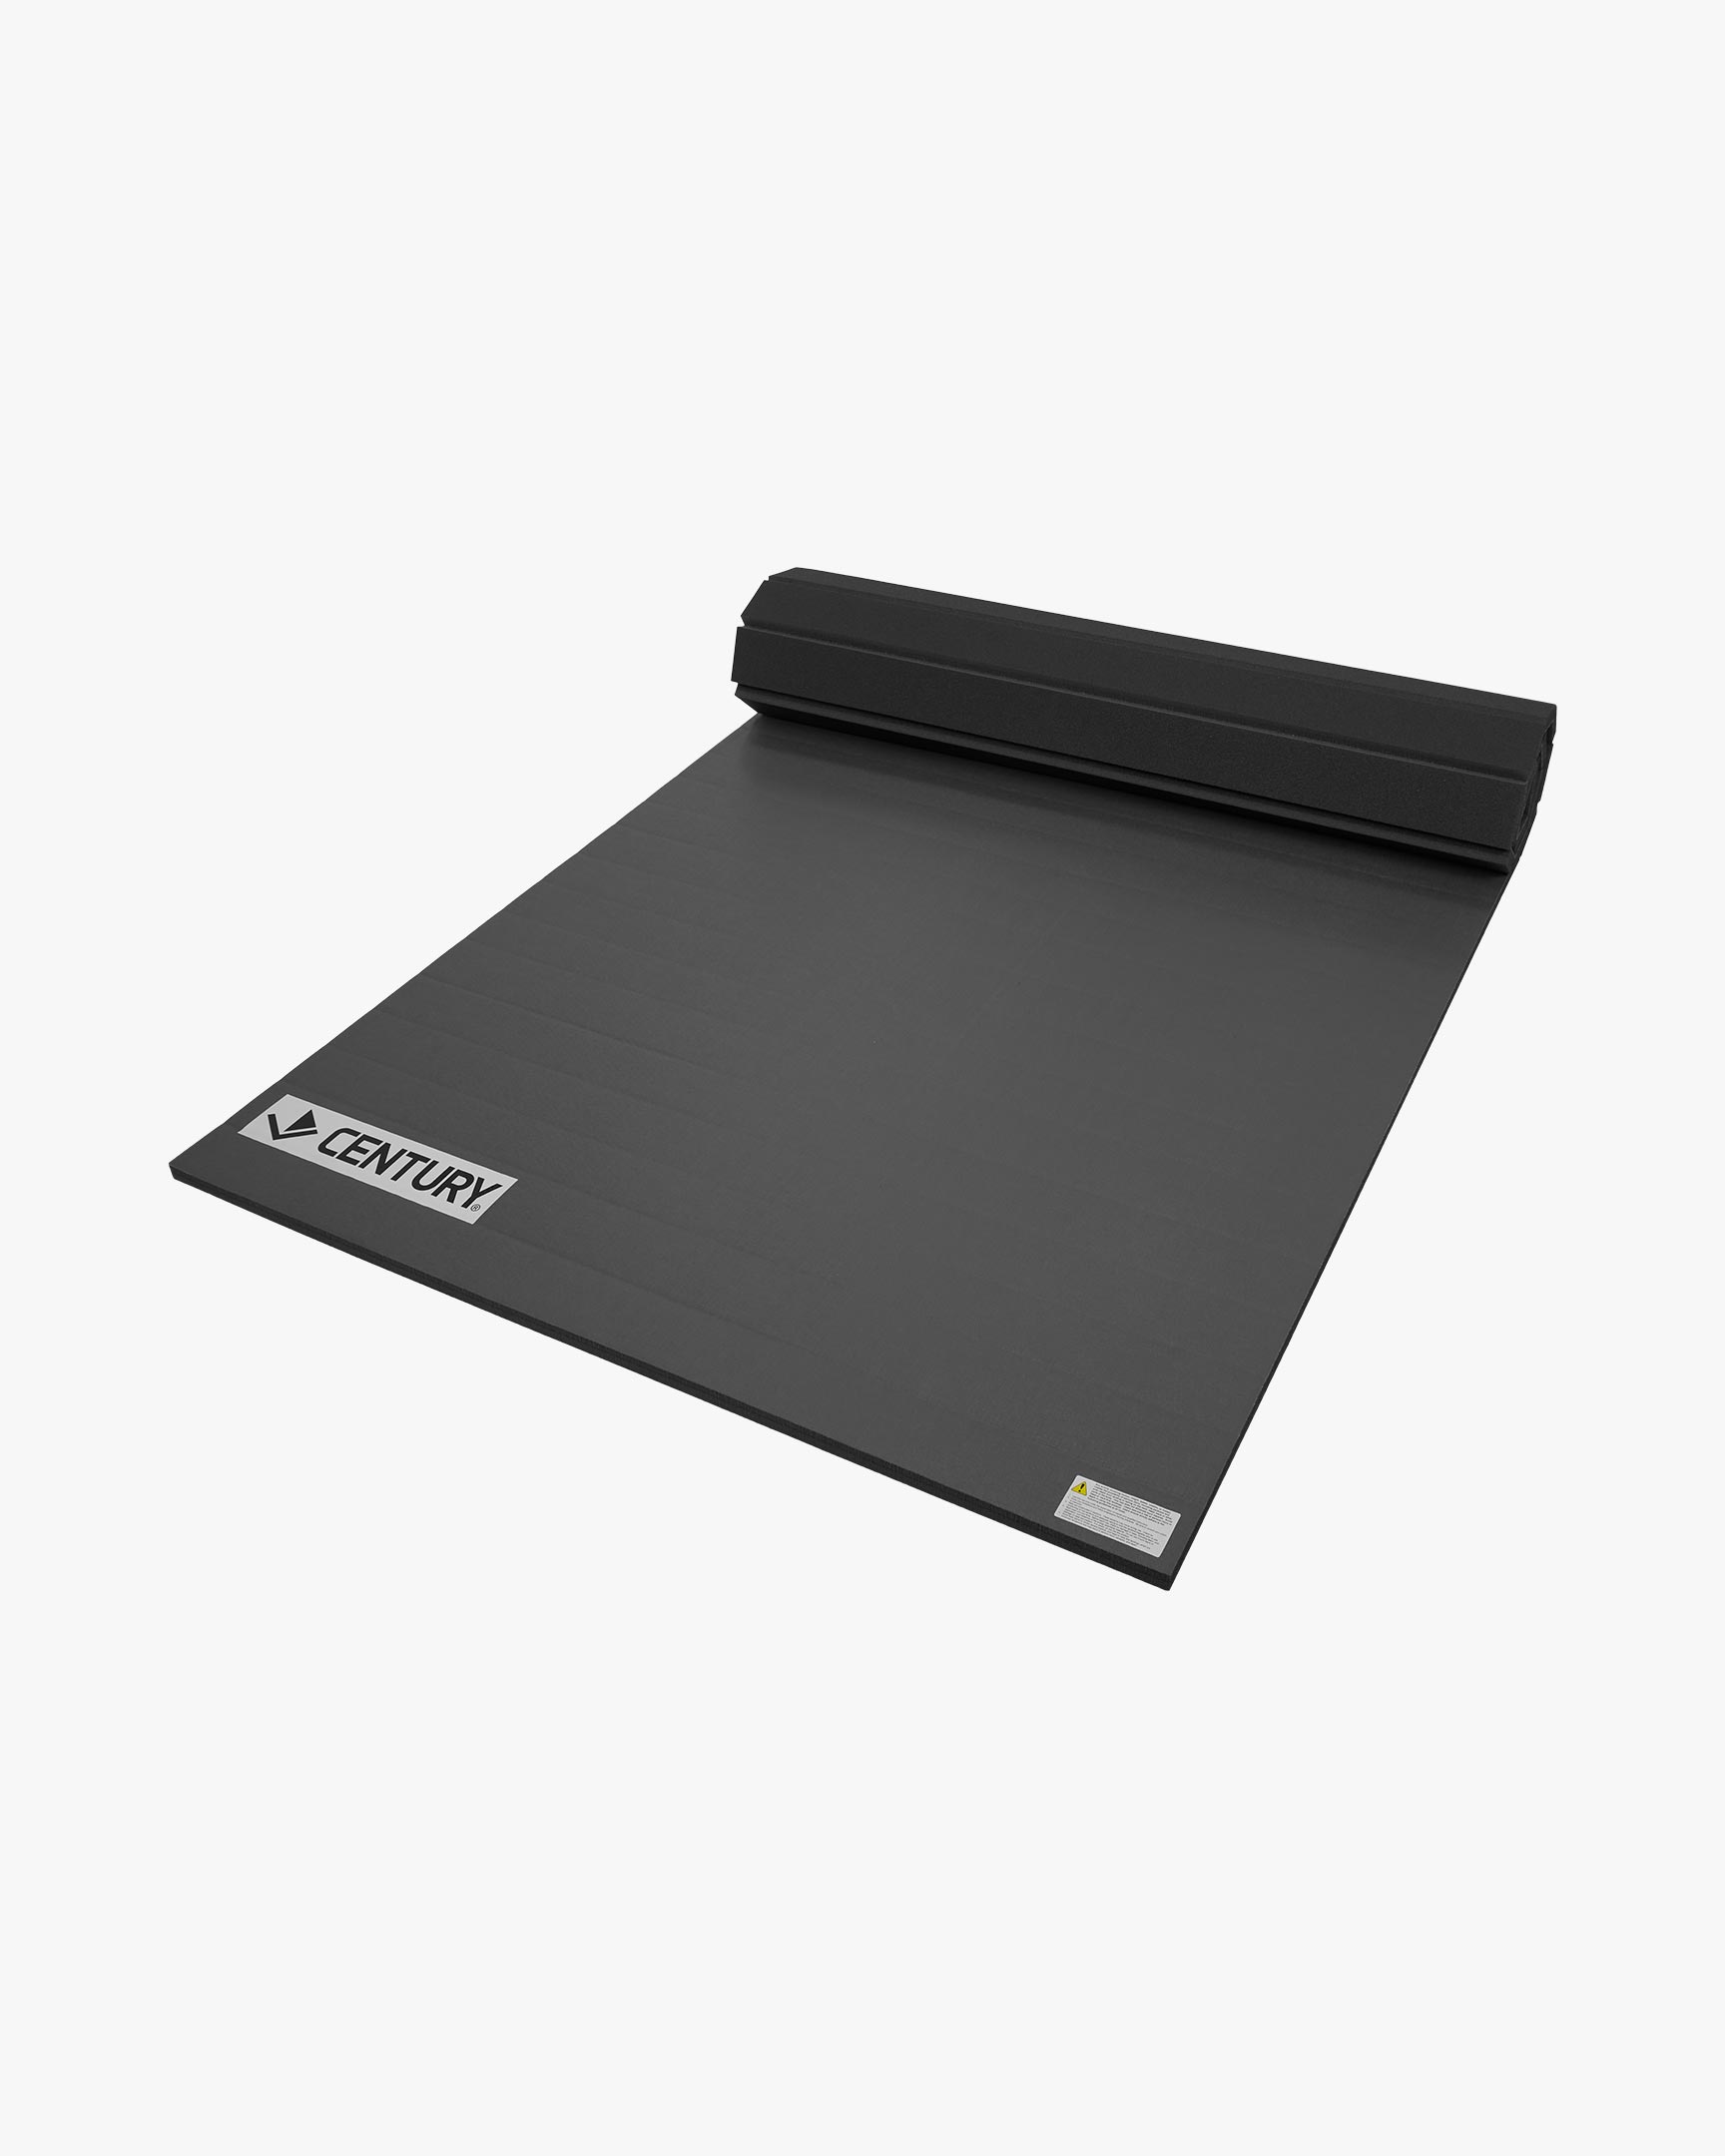 Home Tatami Rollout Mat - 5' x 10' x 1.25" Thick Charcoal Grey